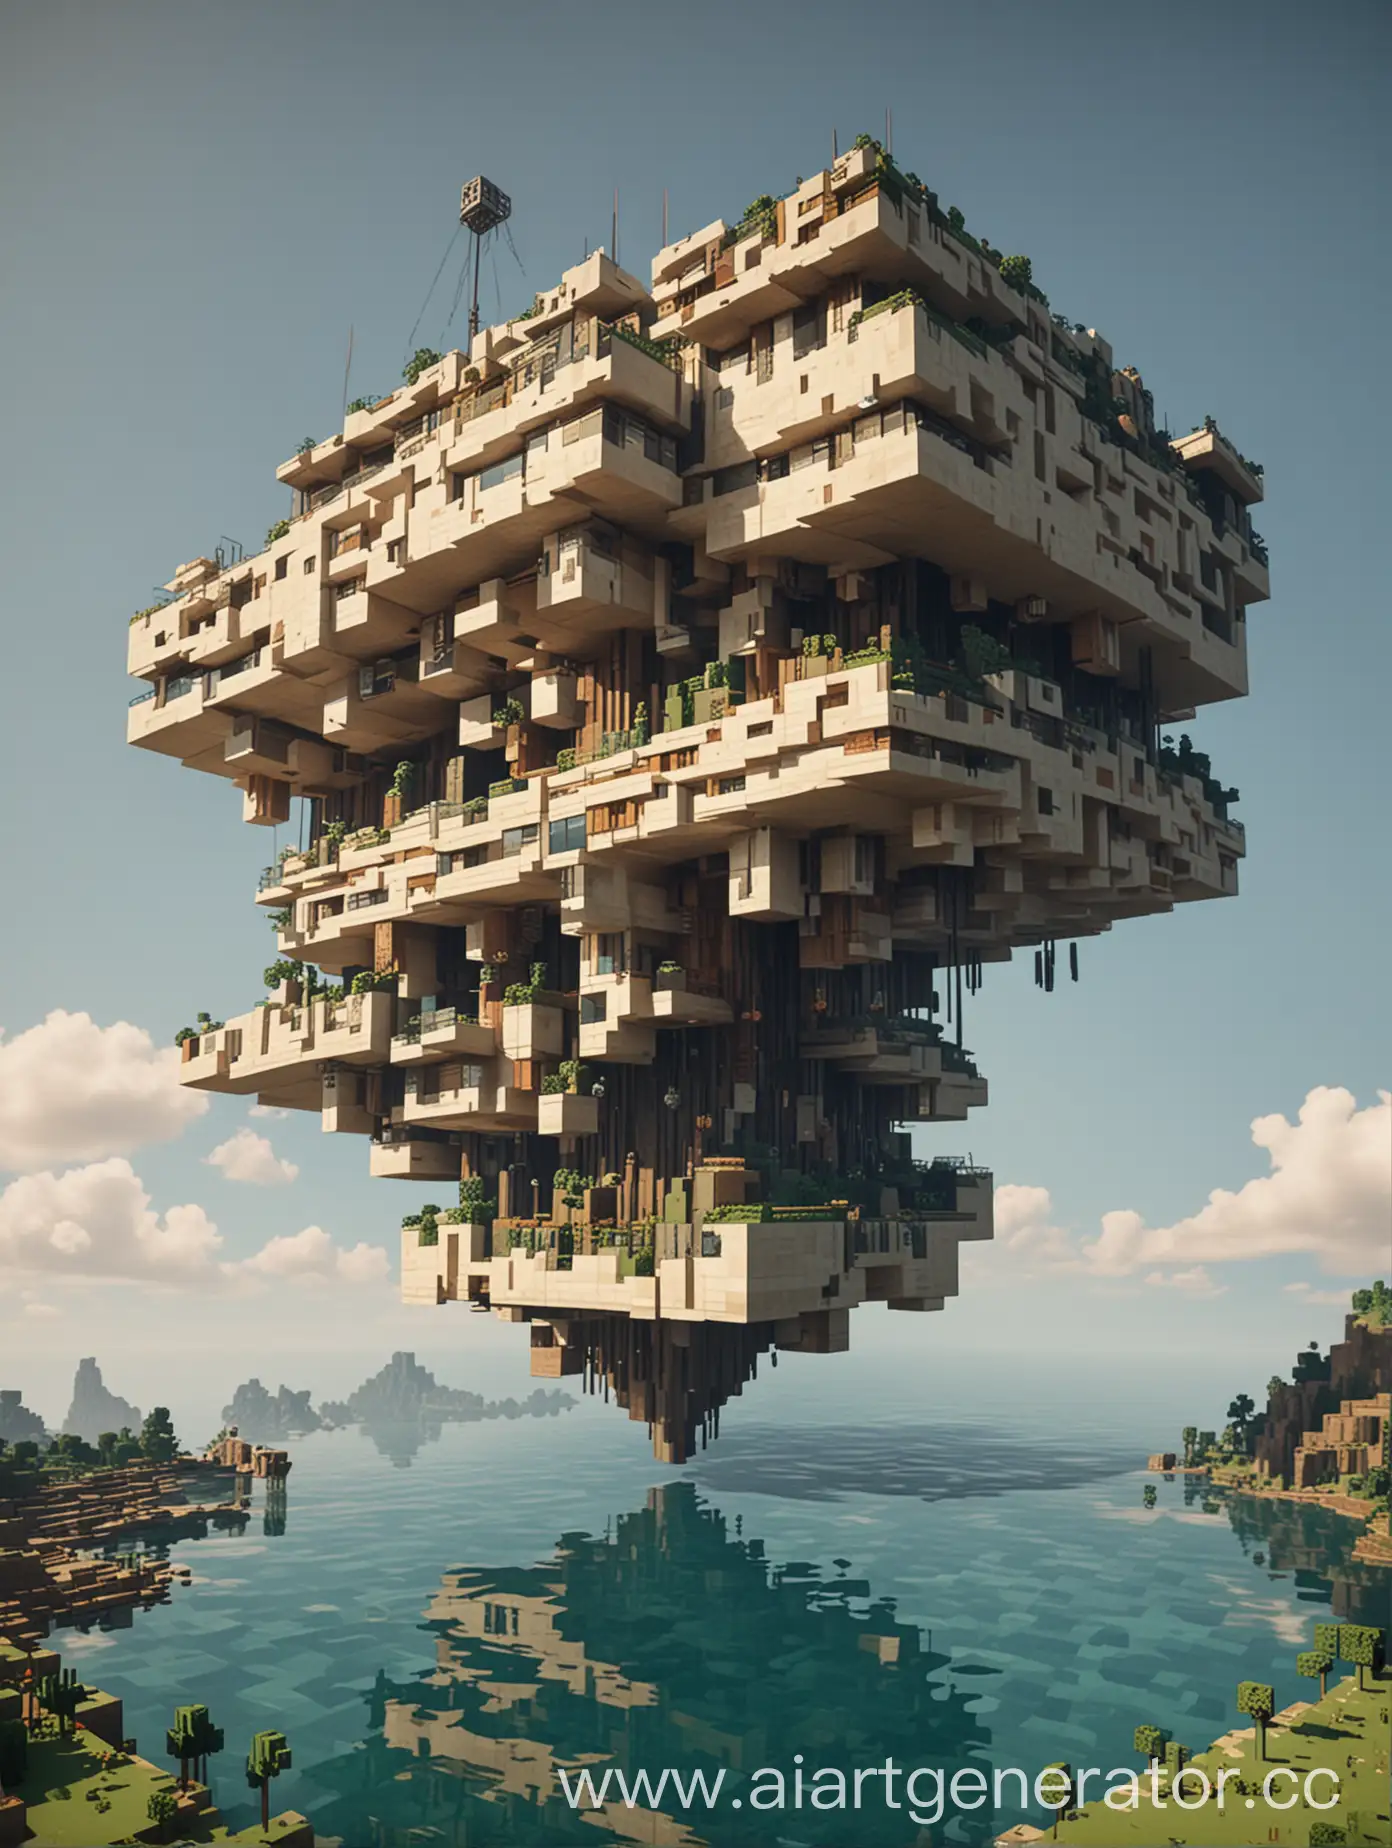 Modern-Abstract-Floating-Building-in-Minecraft-Style